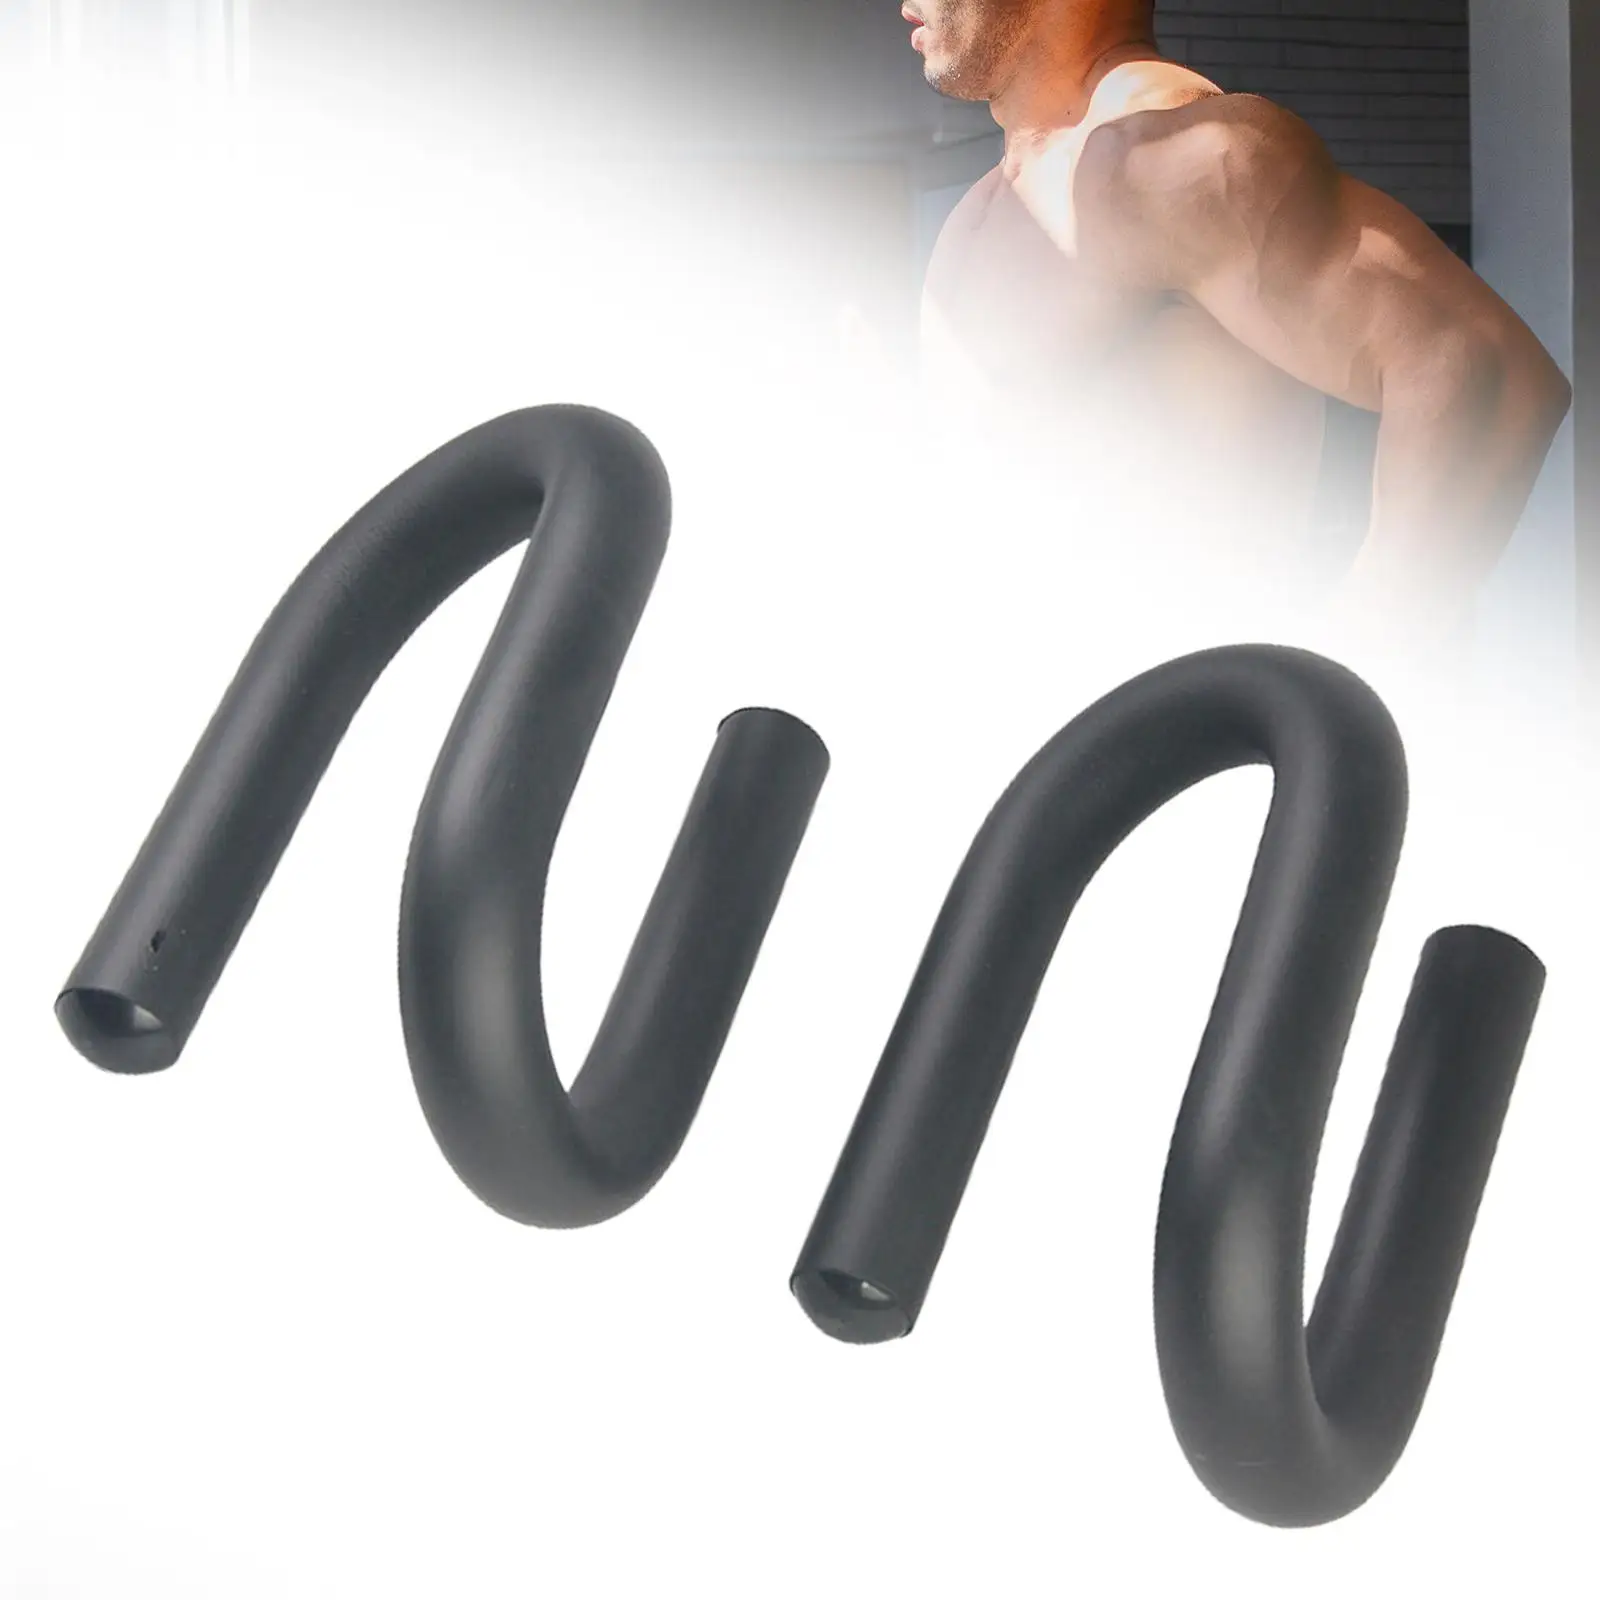 Push up Bars for Floor Portable Stable Steel Pipe Push up Handles for Adults Men Women Home Gym Strength Training Body Building